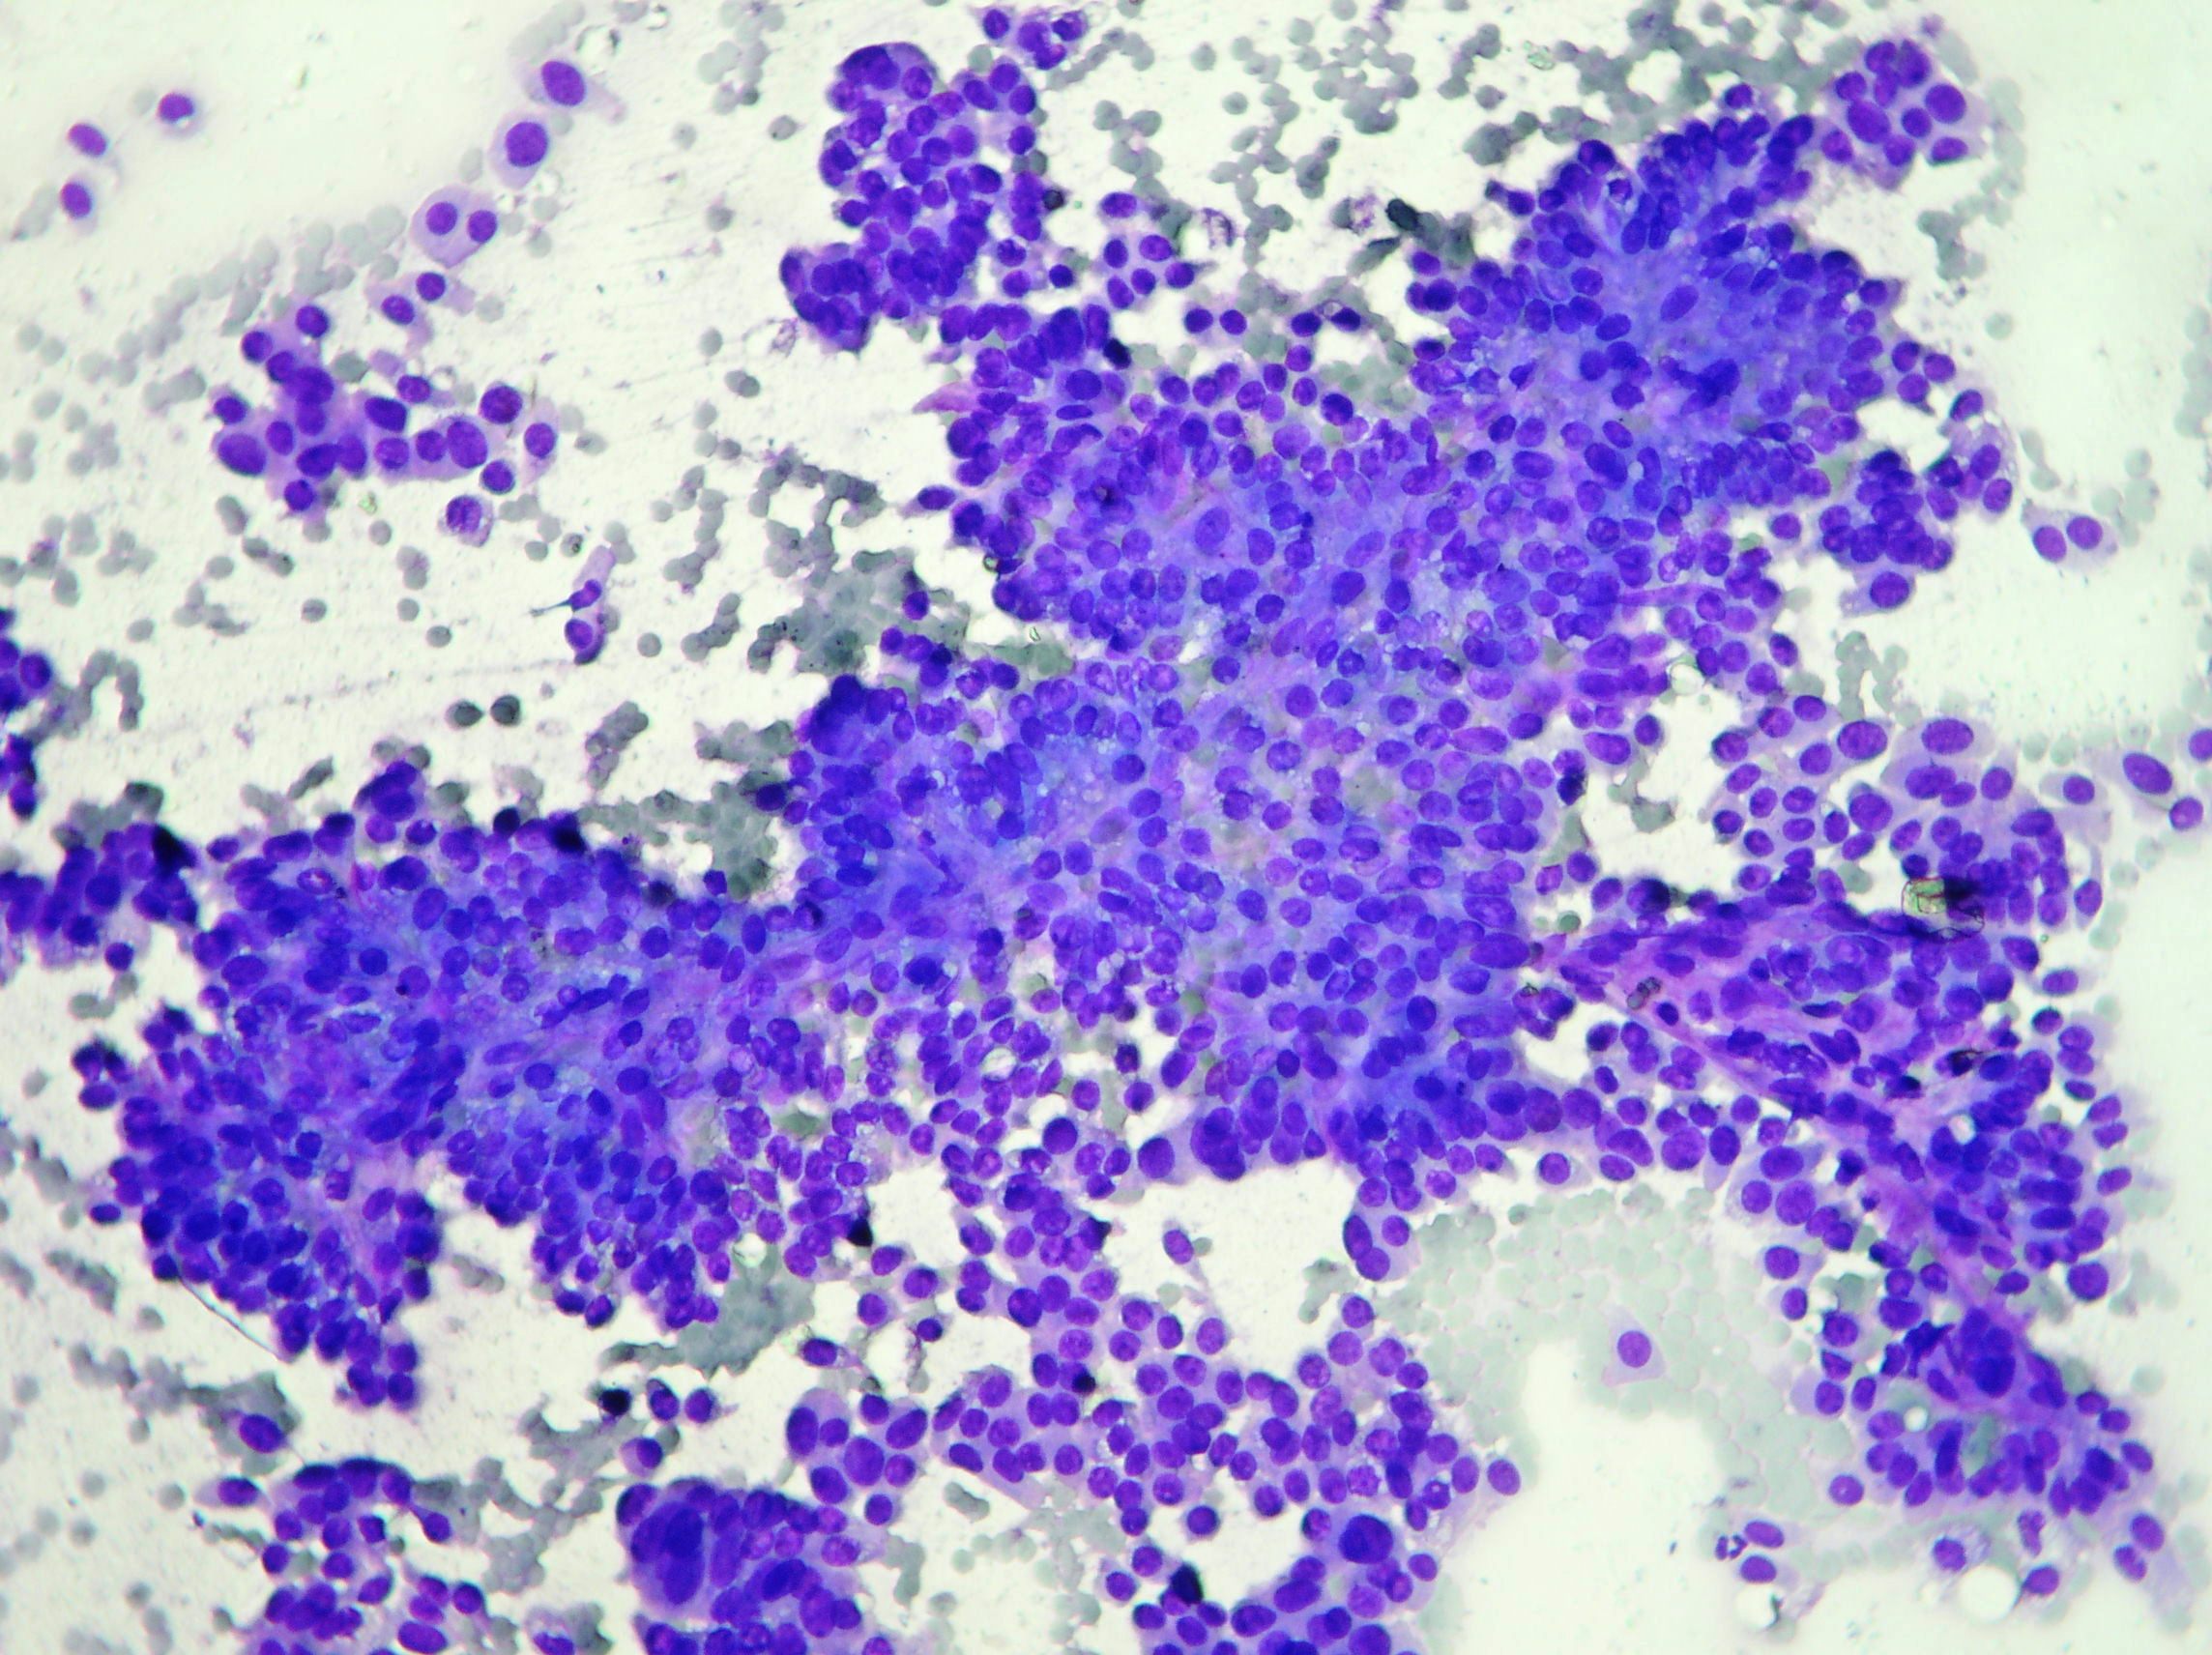 Intraductal papilloma with squamous metaplasia, Duct papilloma cytology